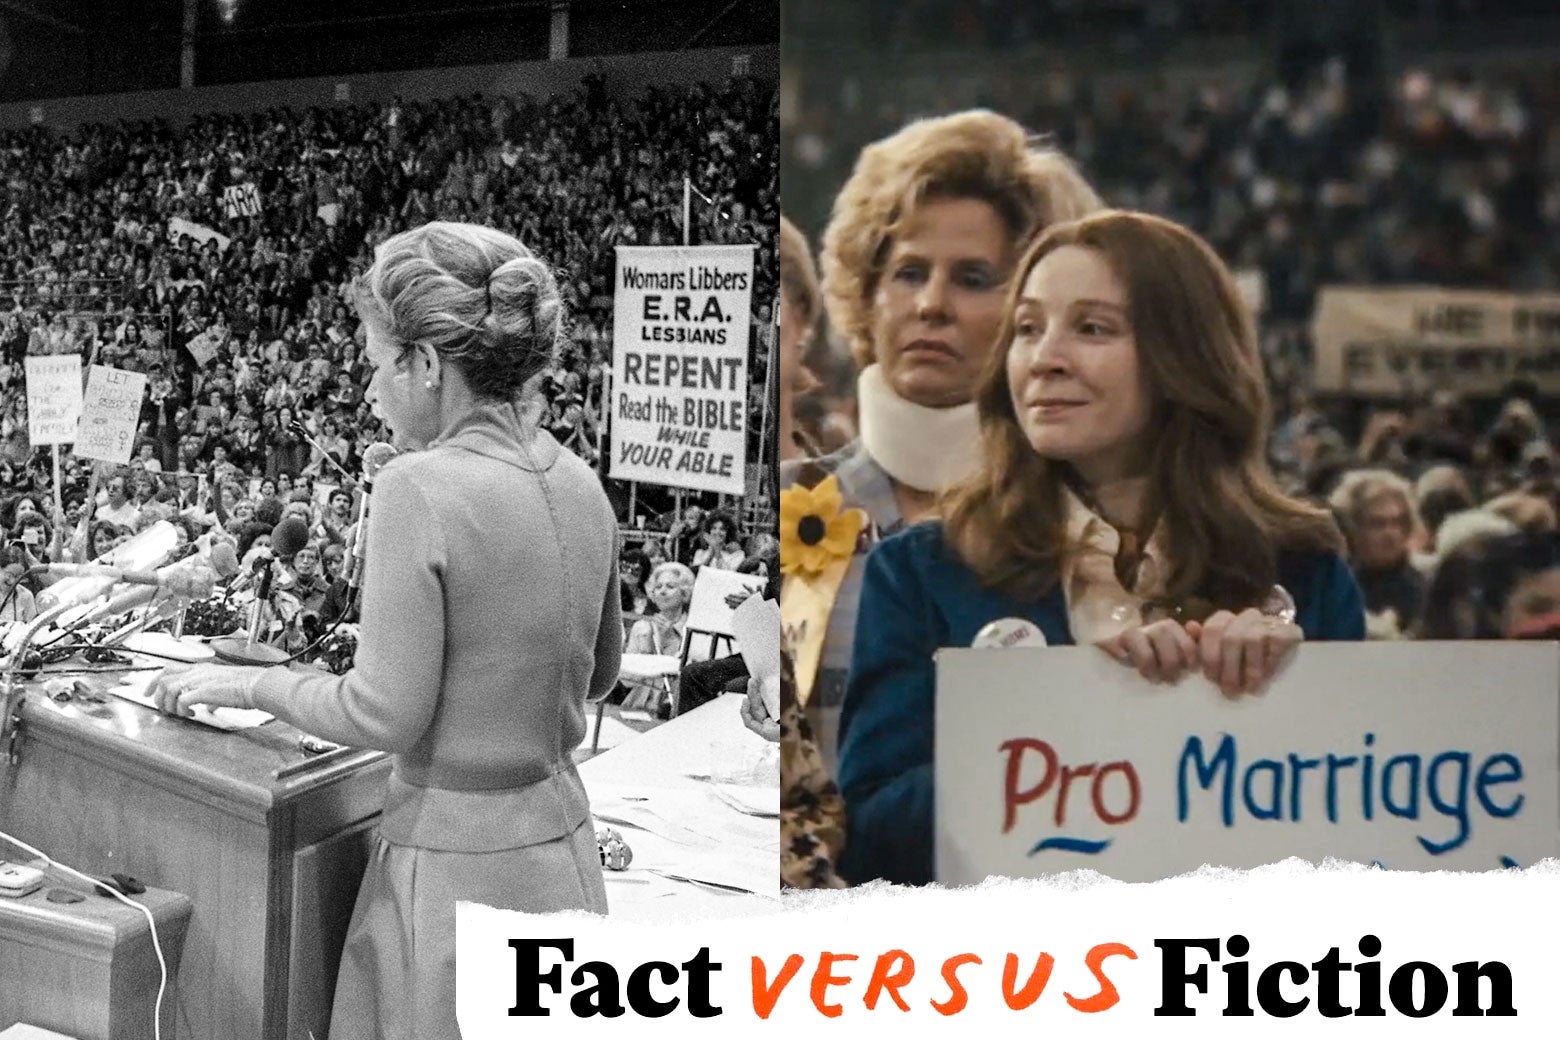 The two crowds look remarkably similar, with signs raised including "Pro Marriage." In the bottom right, a logo reads "Fact vs. Fiction."